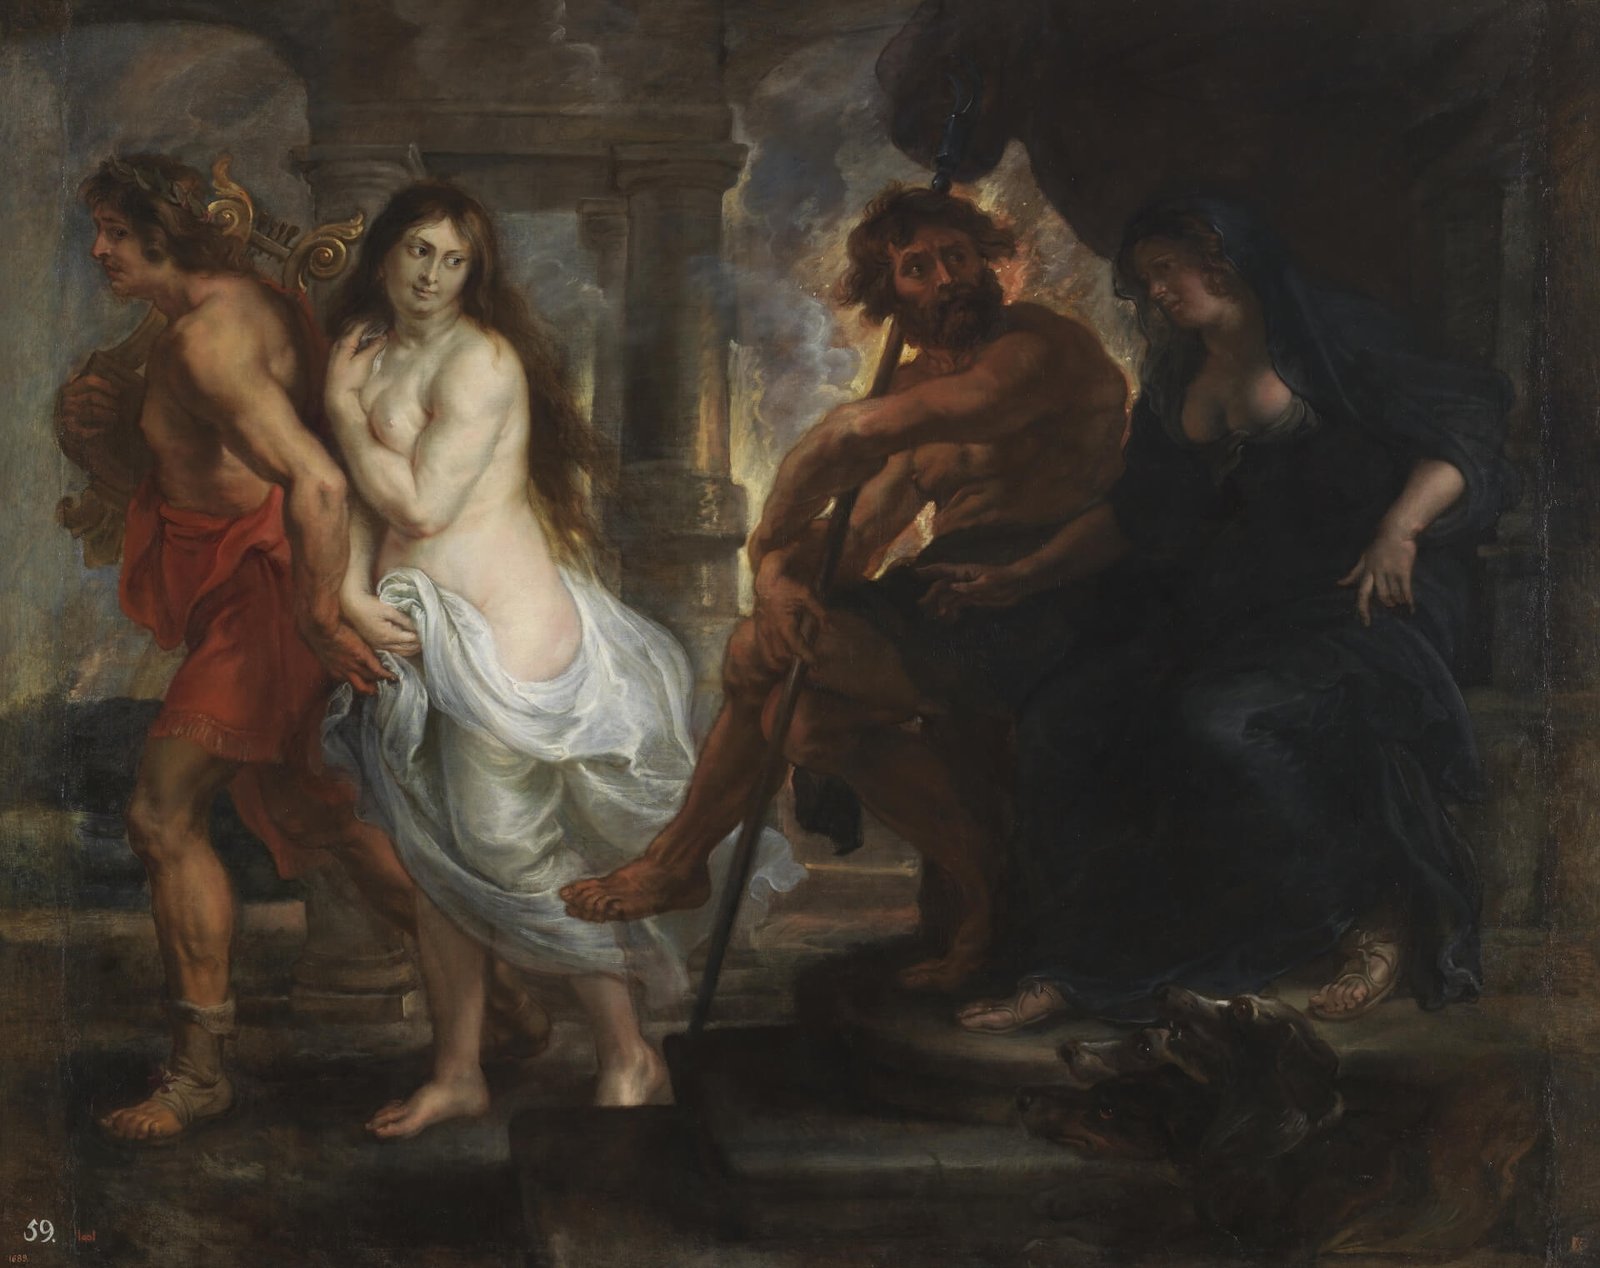 This painting represents Orpheus and Eurydice, leaving Hades, the greek god of the underworld and his spouse Persephone.